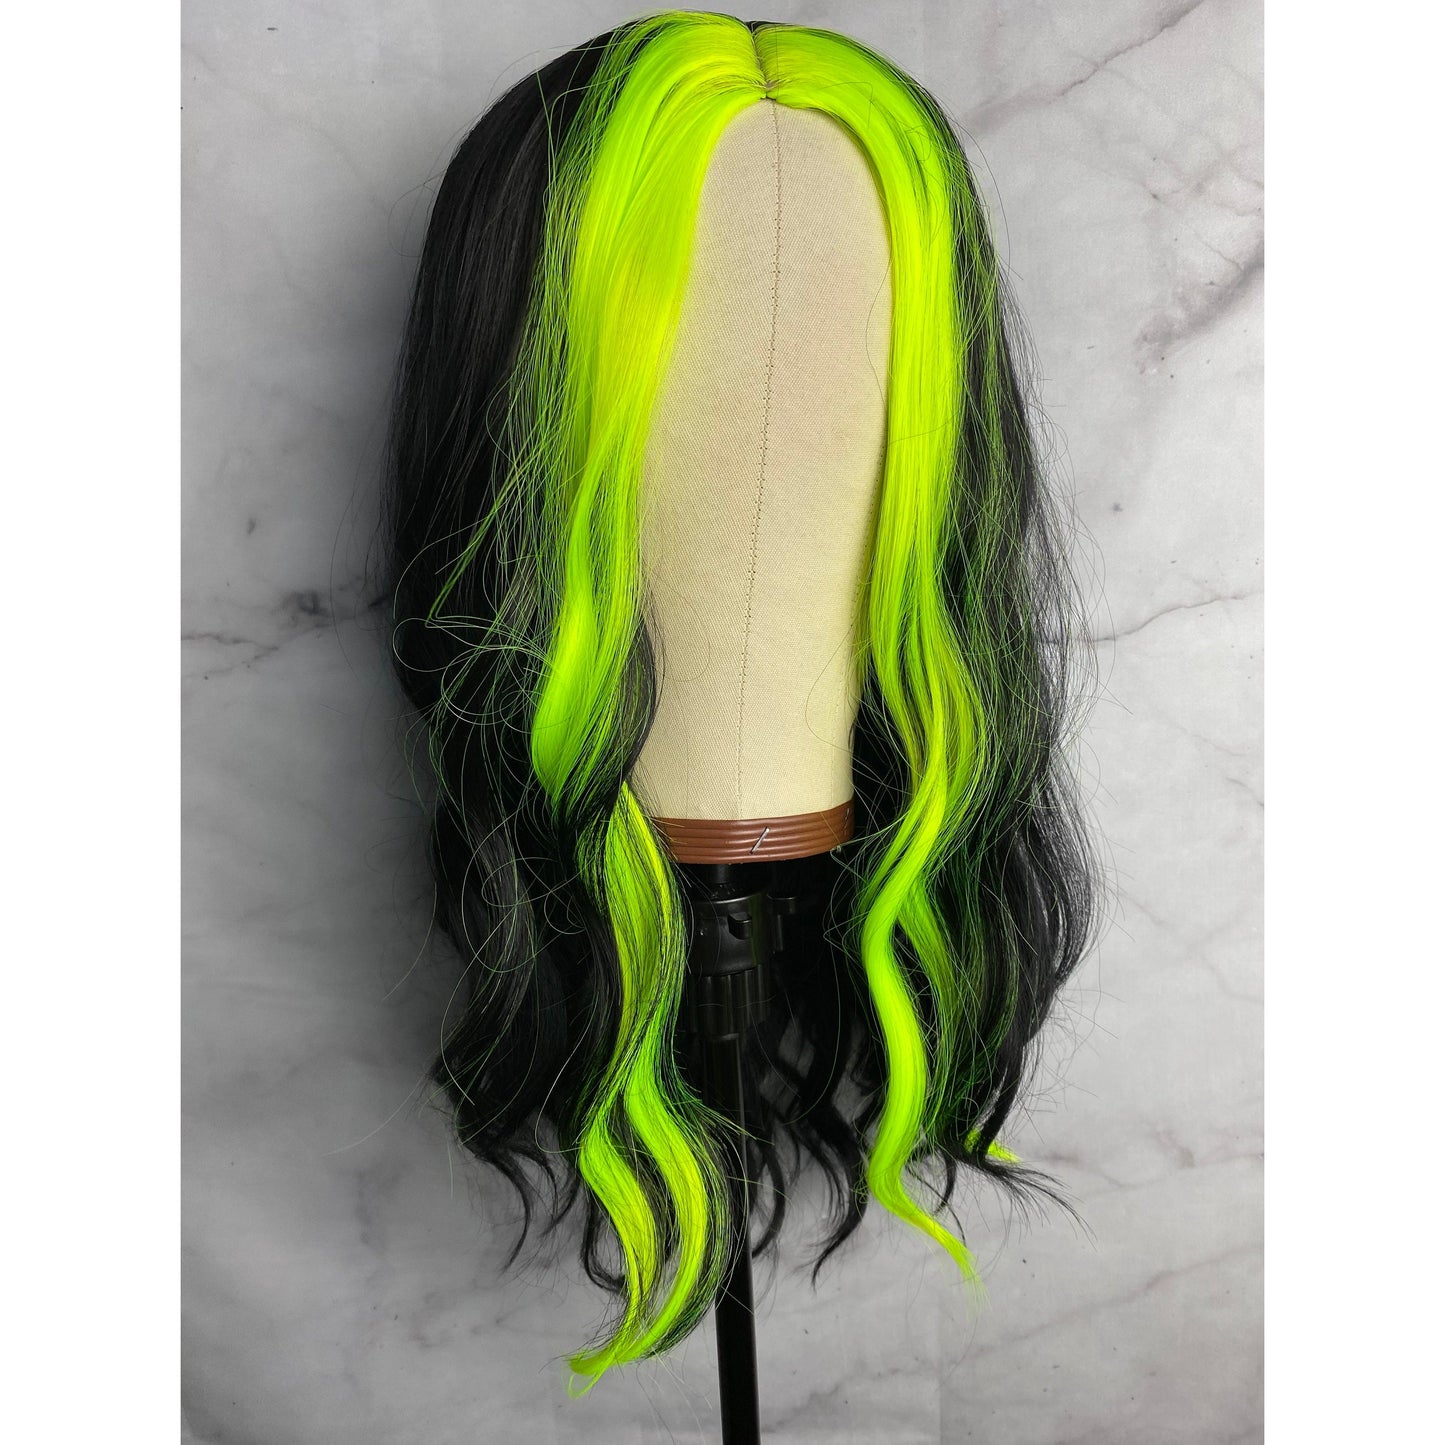 Black and Neon Green Wig,Billie Eilish Black and Green Wigs,Curly Wavy Wig,Black Wigs With Green Highligh,Short Bob Wigs,Wig for Patients